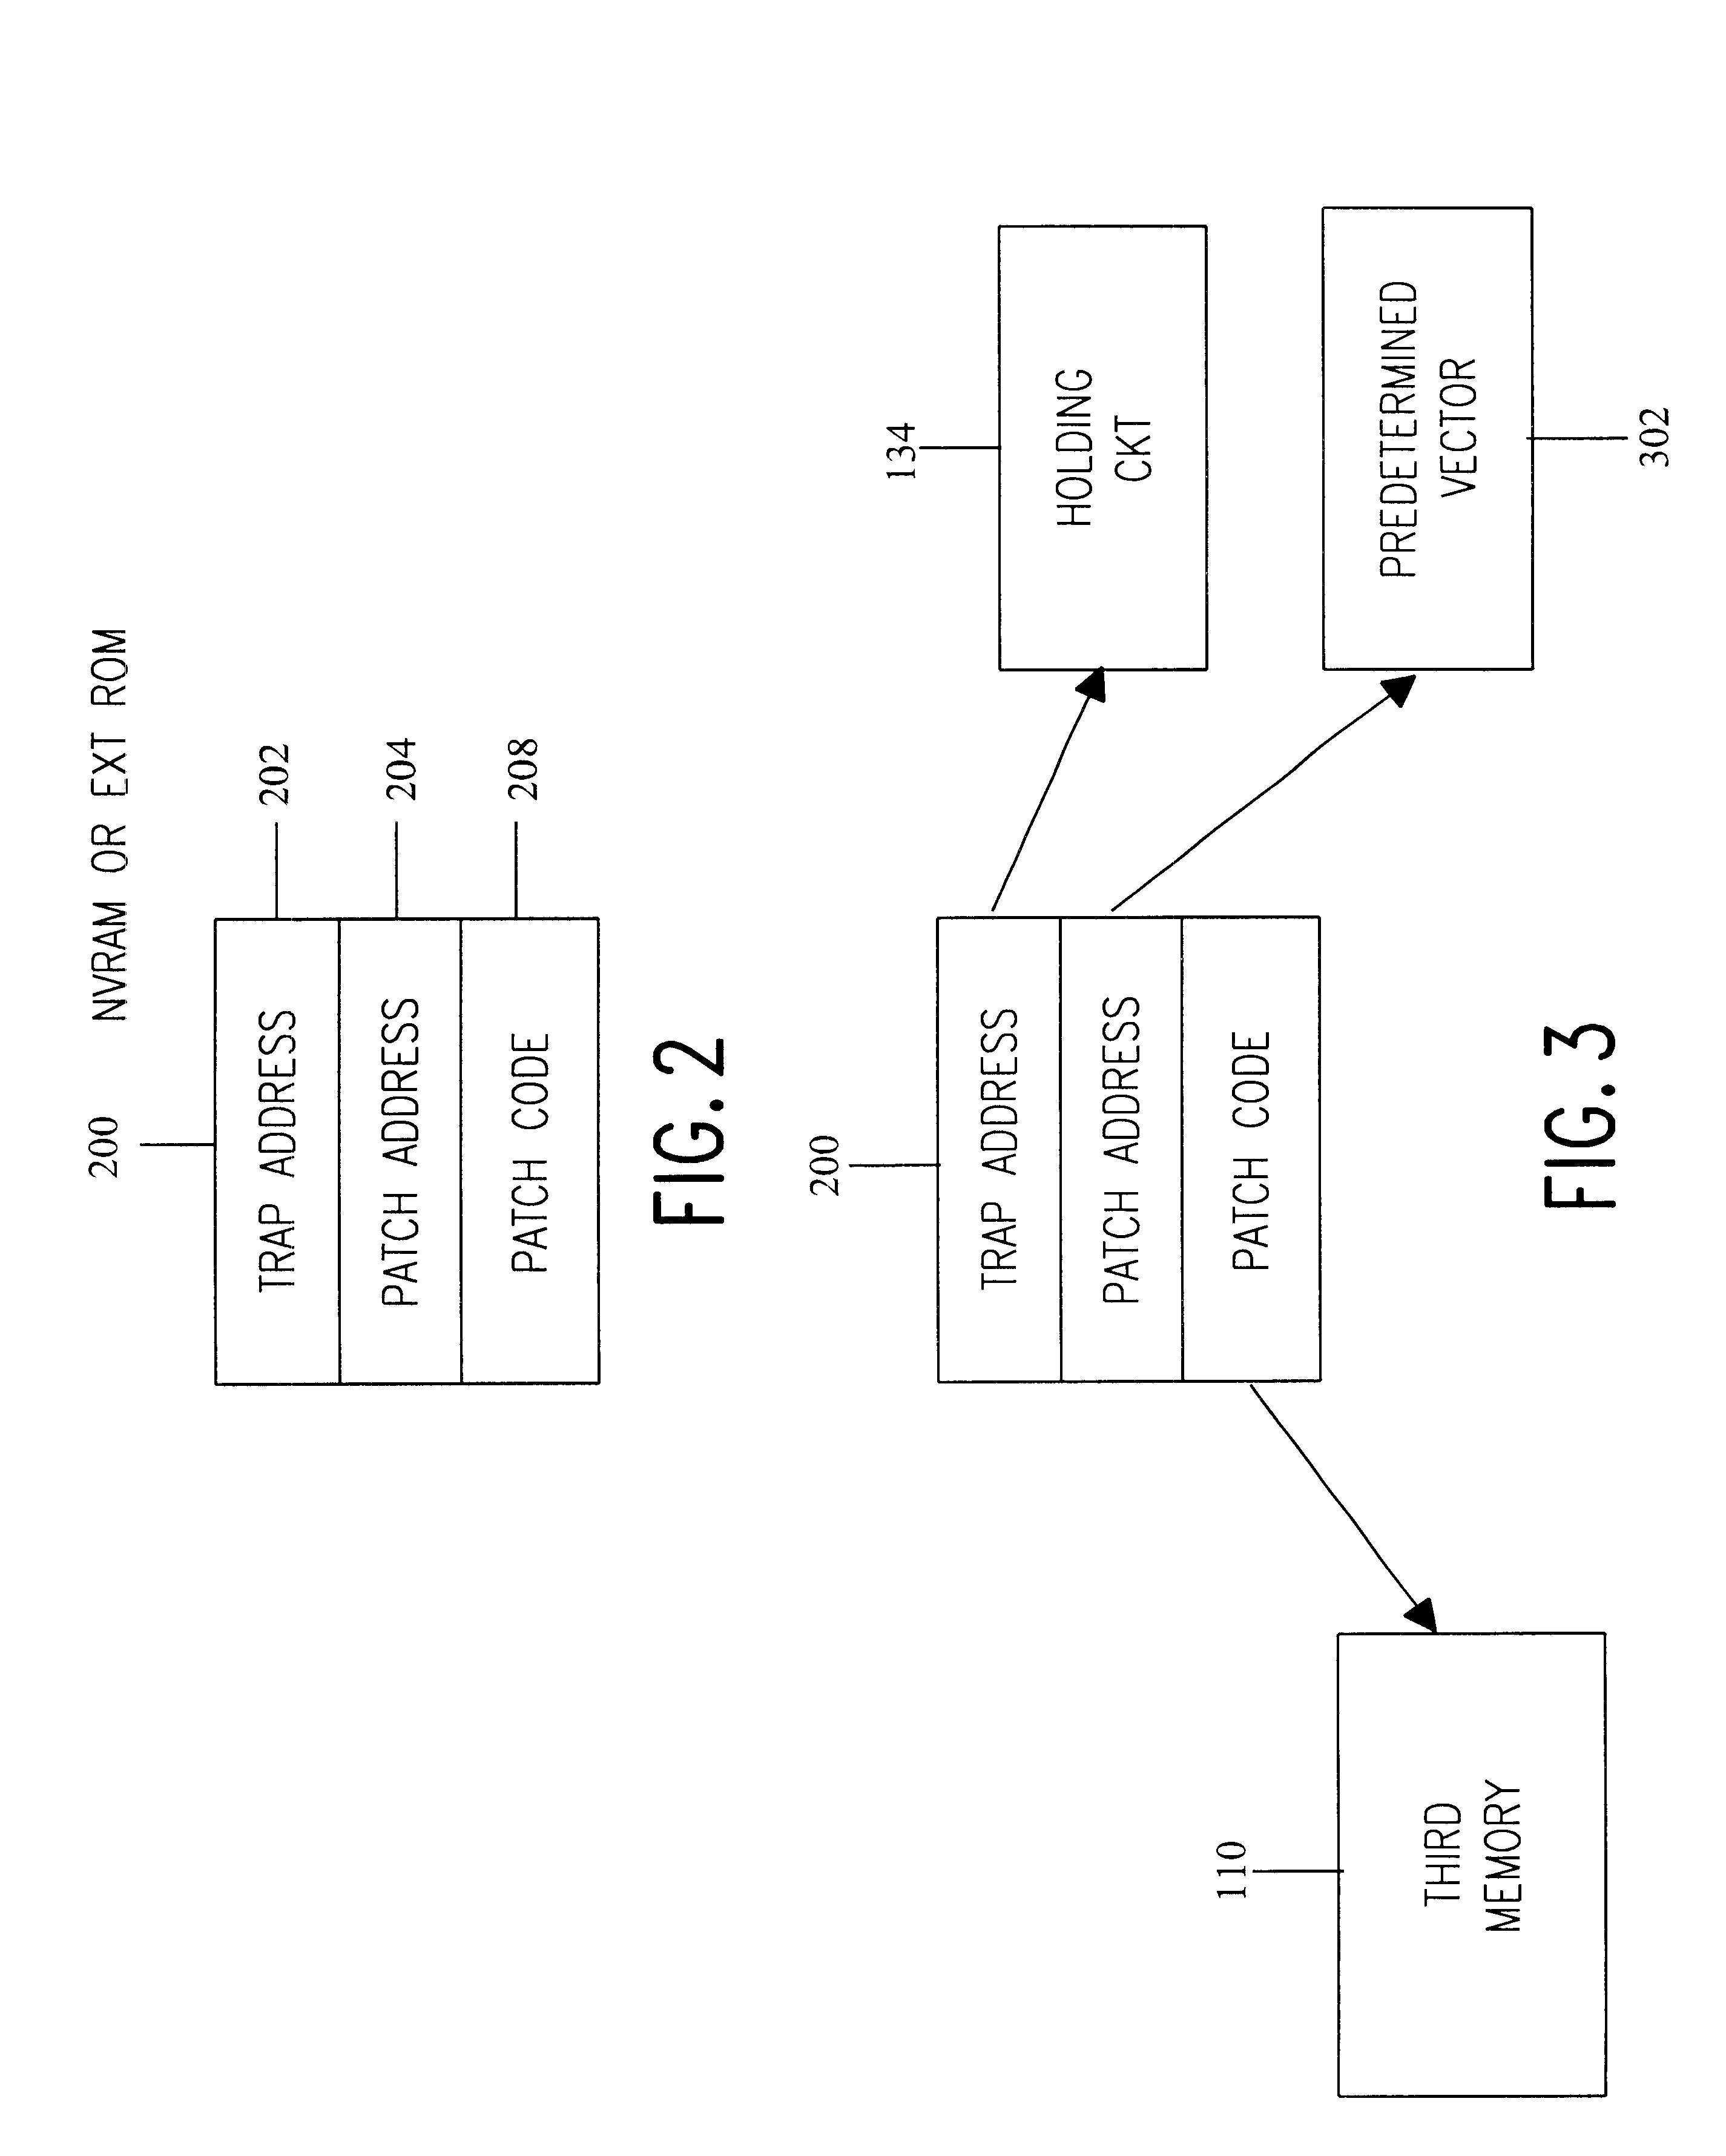 System and method for providing a trap and patch function to low power, cost conscious, and space constrained applications